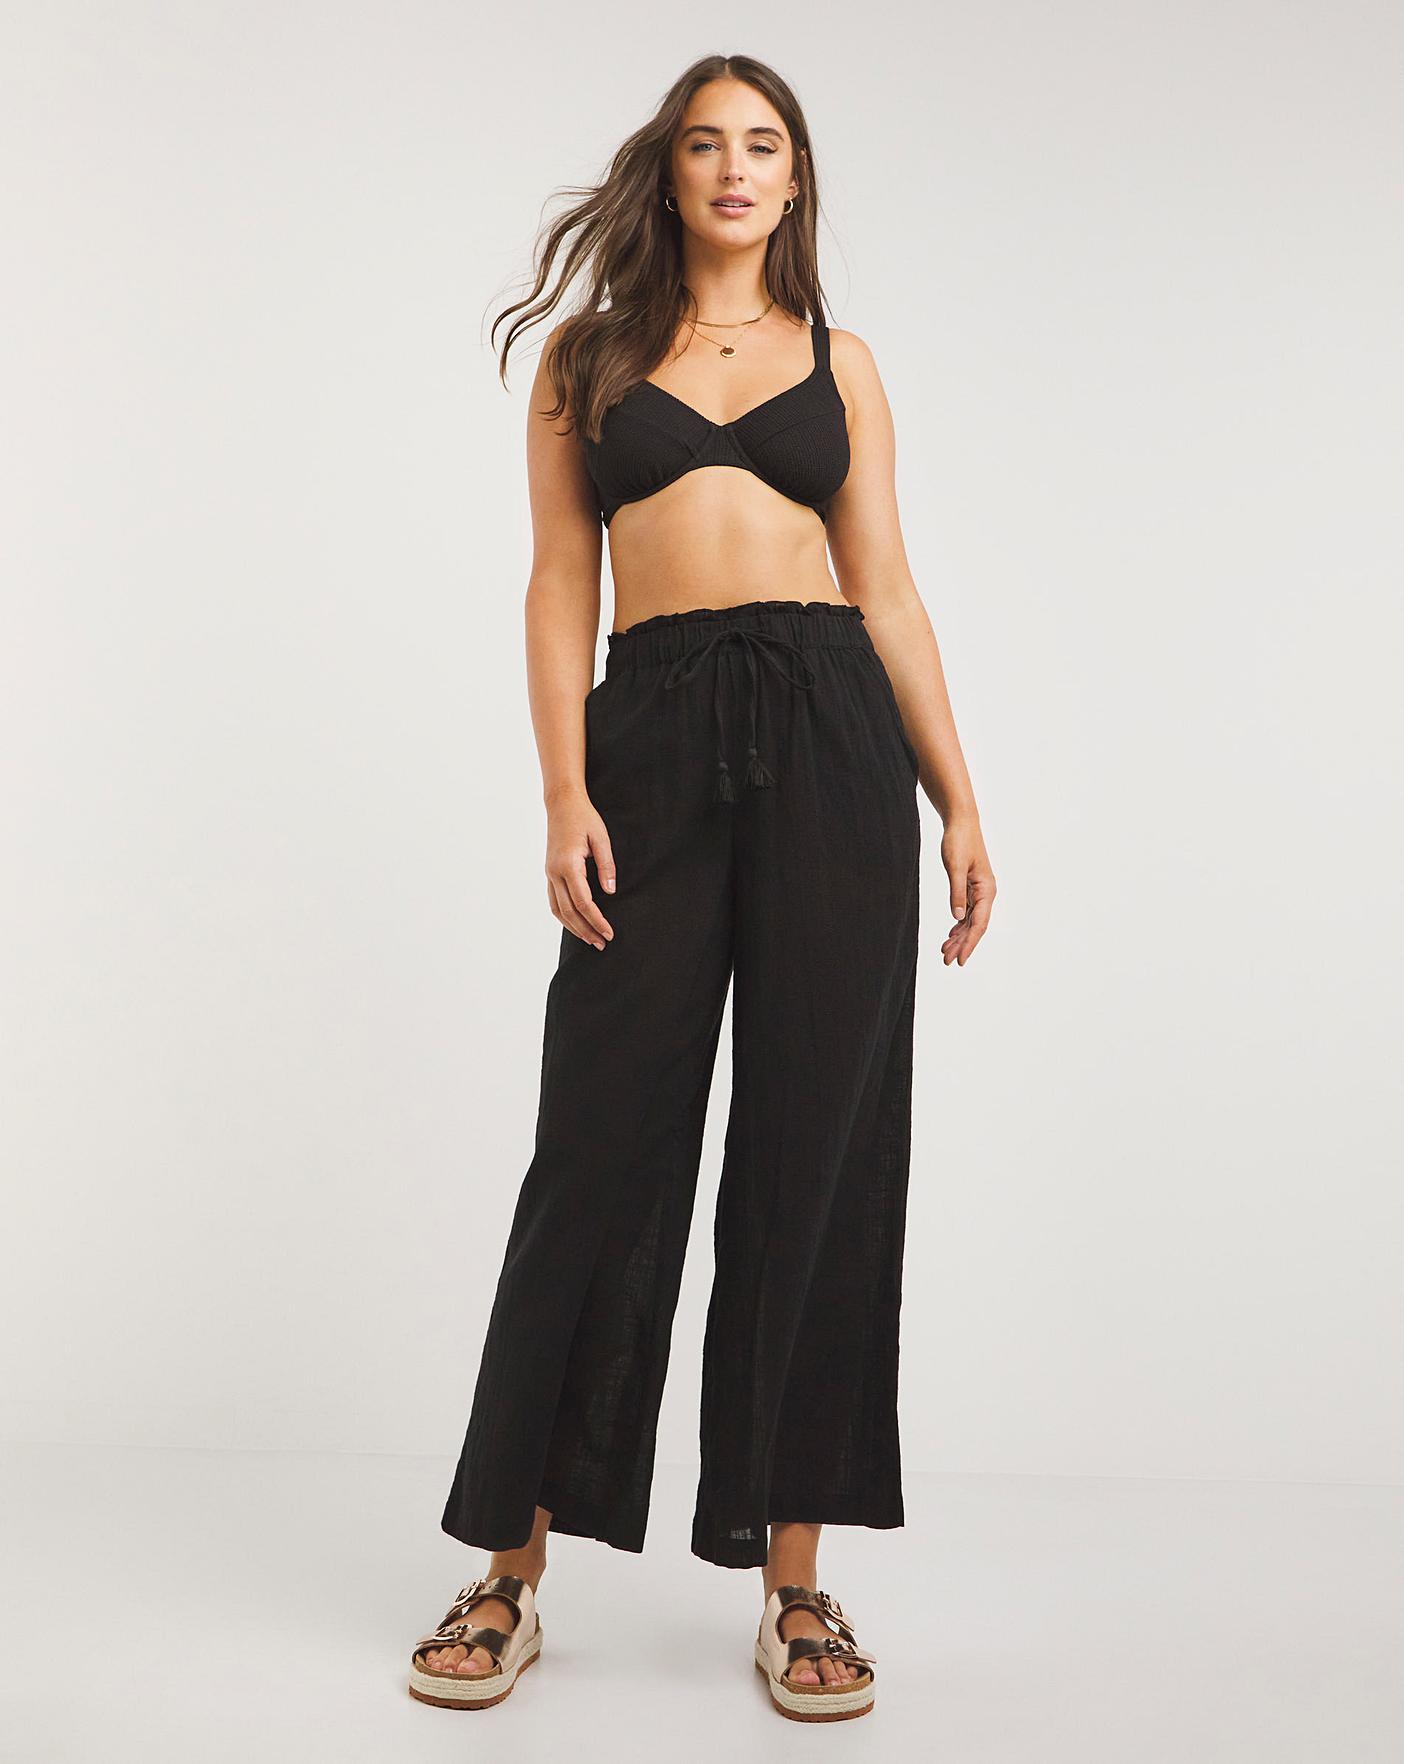 Bohemian Vintage Cotton Linen Beach Flare Trousers Wide Leg, High Waist,  Solid Color, Loose Fit For Women 211105 From Lu006, $15.51 | DHgate.Com